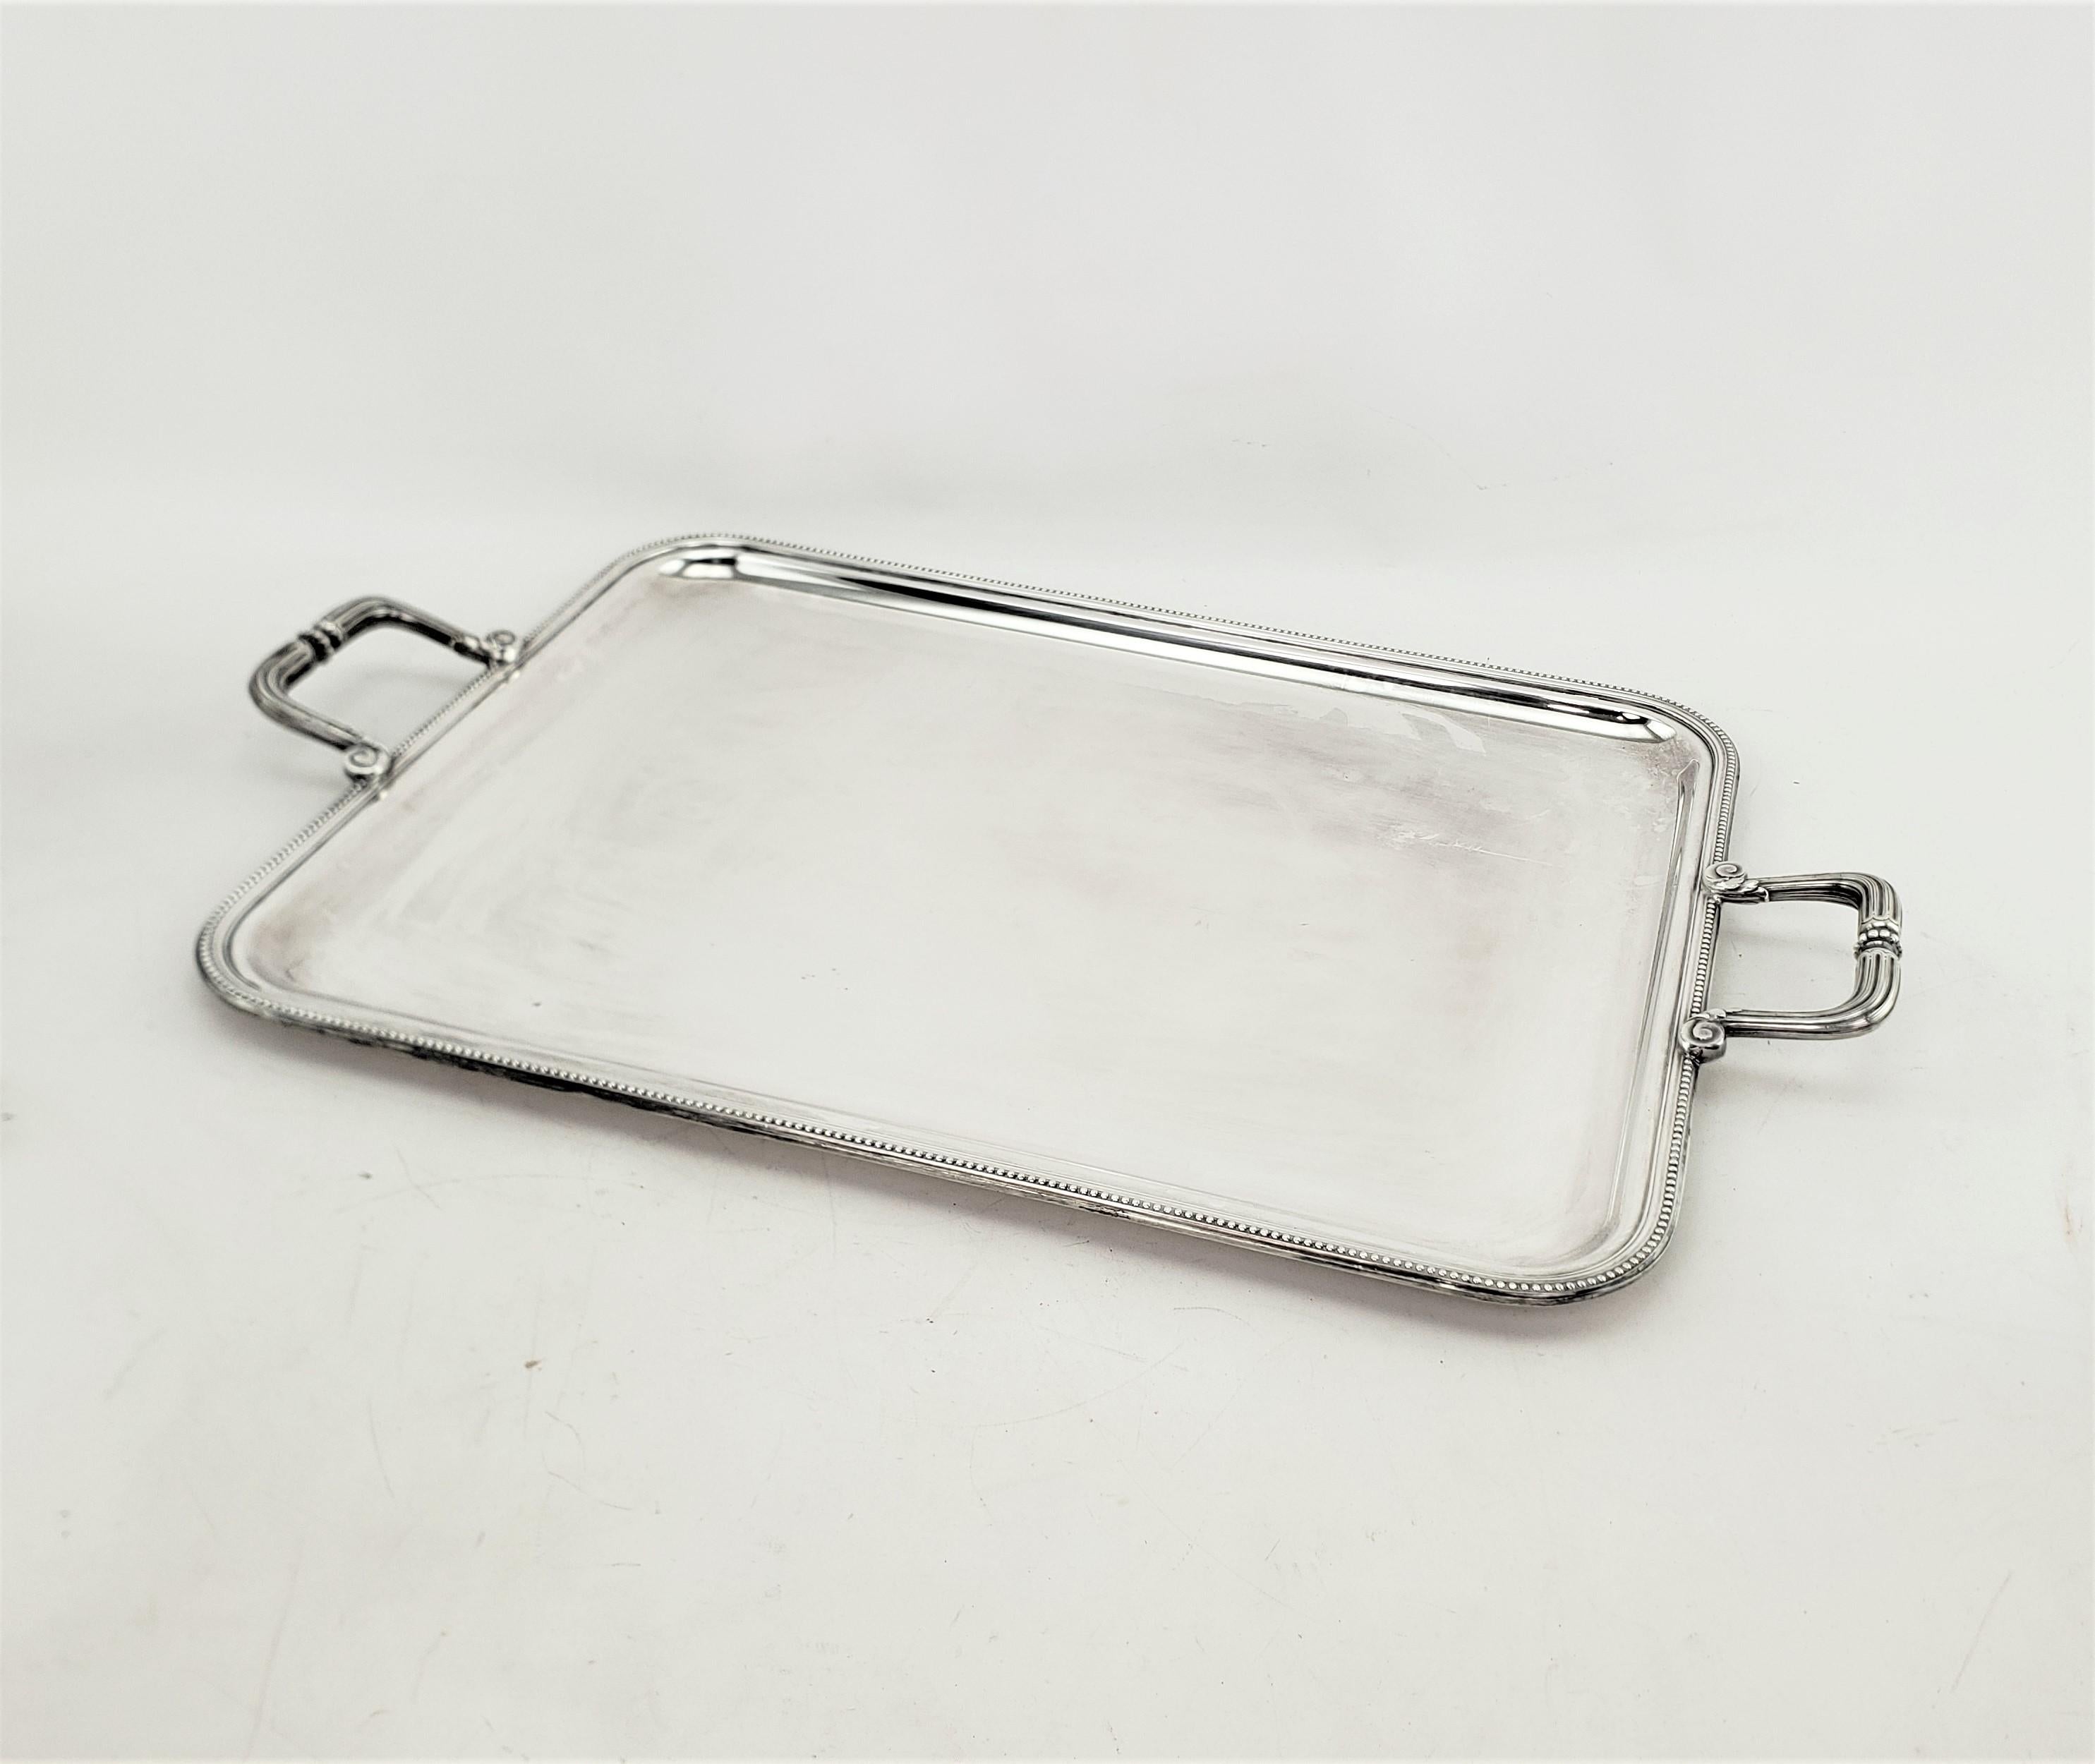 This vintage  serving tray was made by the renowned Christofle company of France in approximately 1965 in a period Mid Century style. The tray is composed of silver plate and has a smooth top surface with accenting stylized rope borders and matching